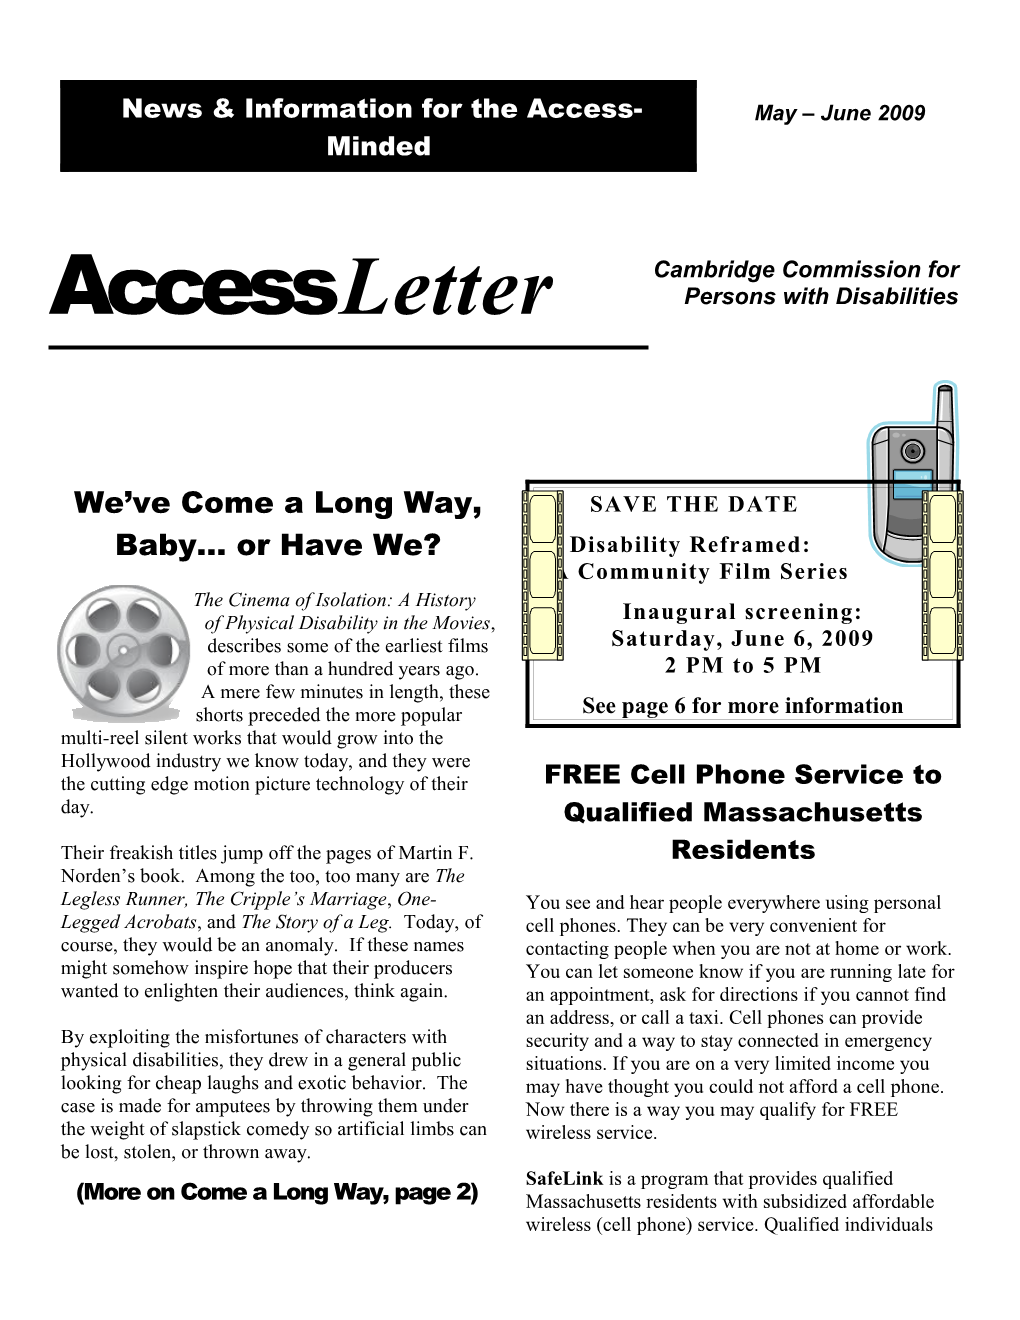 News & Information for the Access-Minded